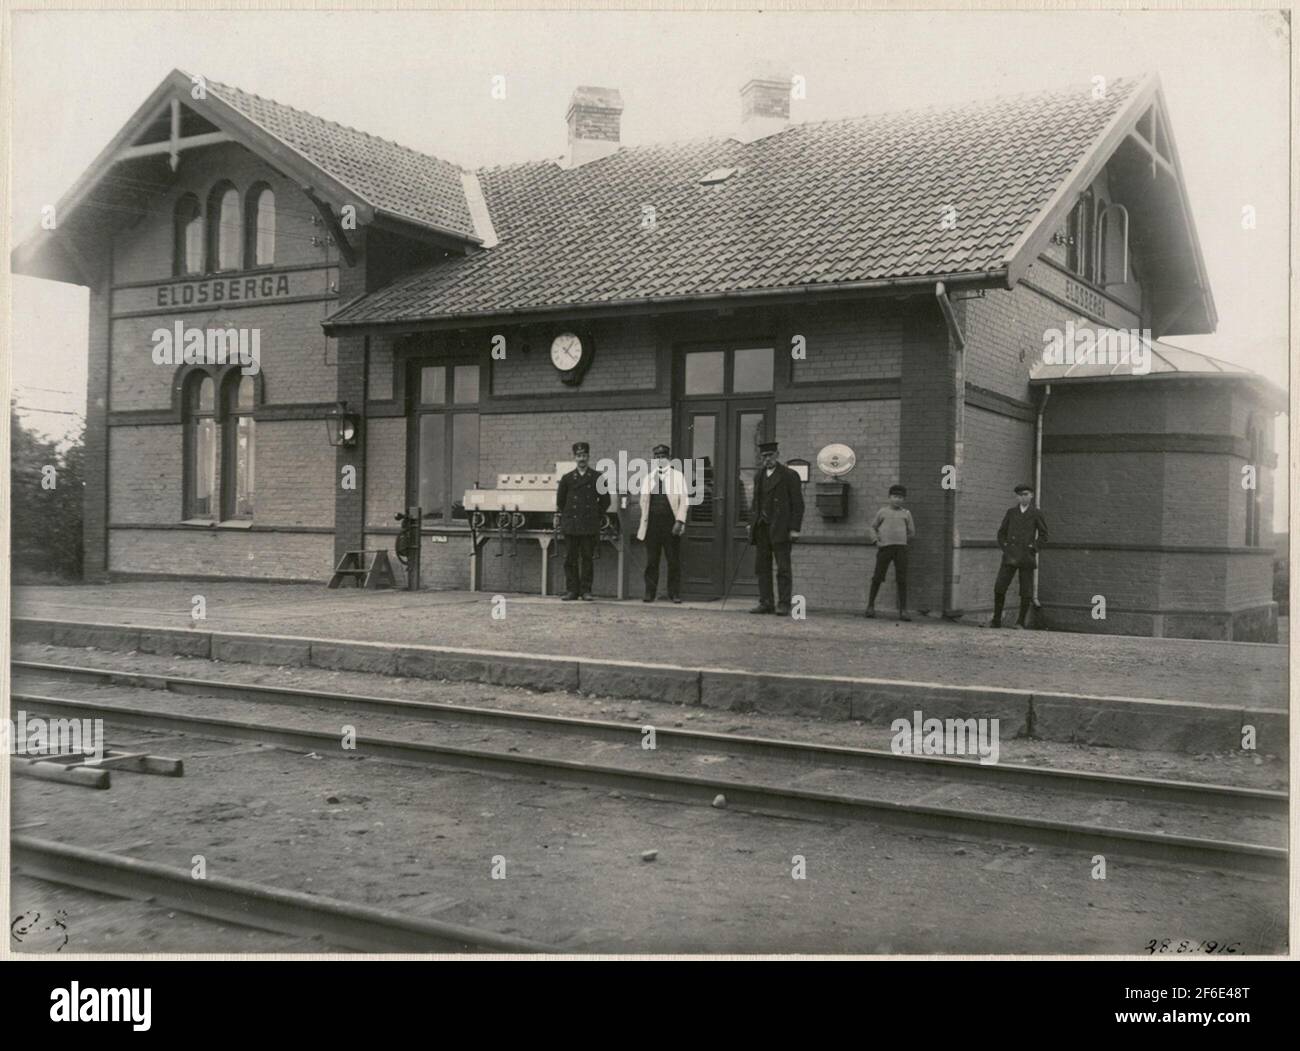 Fireberga railway station was opened in 1885 by Skåne - Halland's railways Shj. To SJ State Railways in 1896, and got electric drive in 1935. Stop in 1964 and was laid down May 31, 1970. Stock Photo